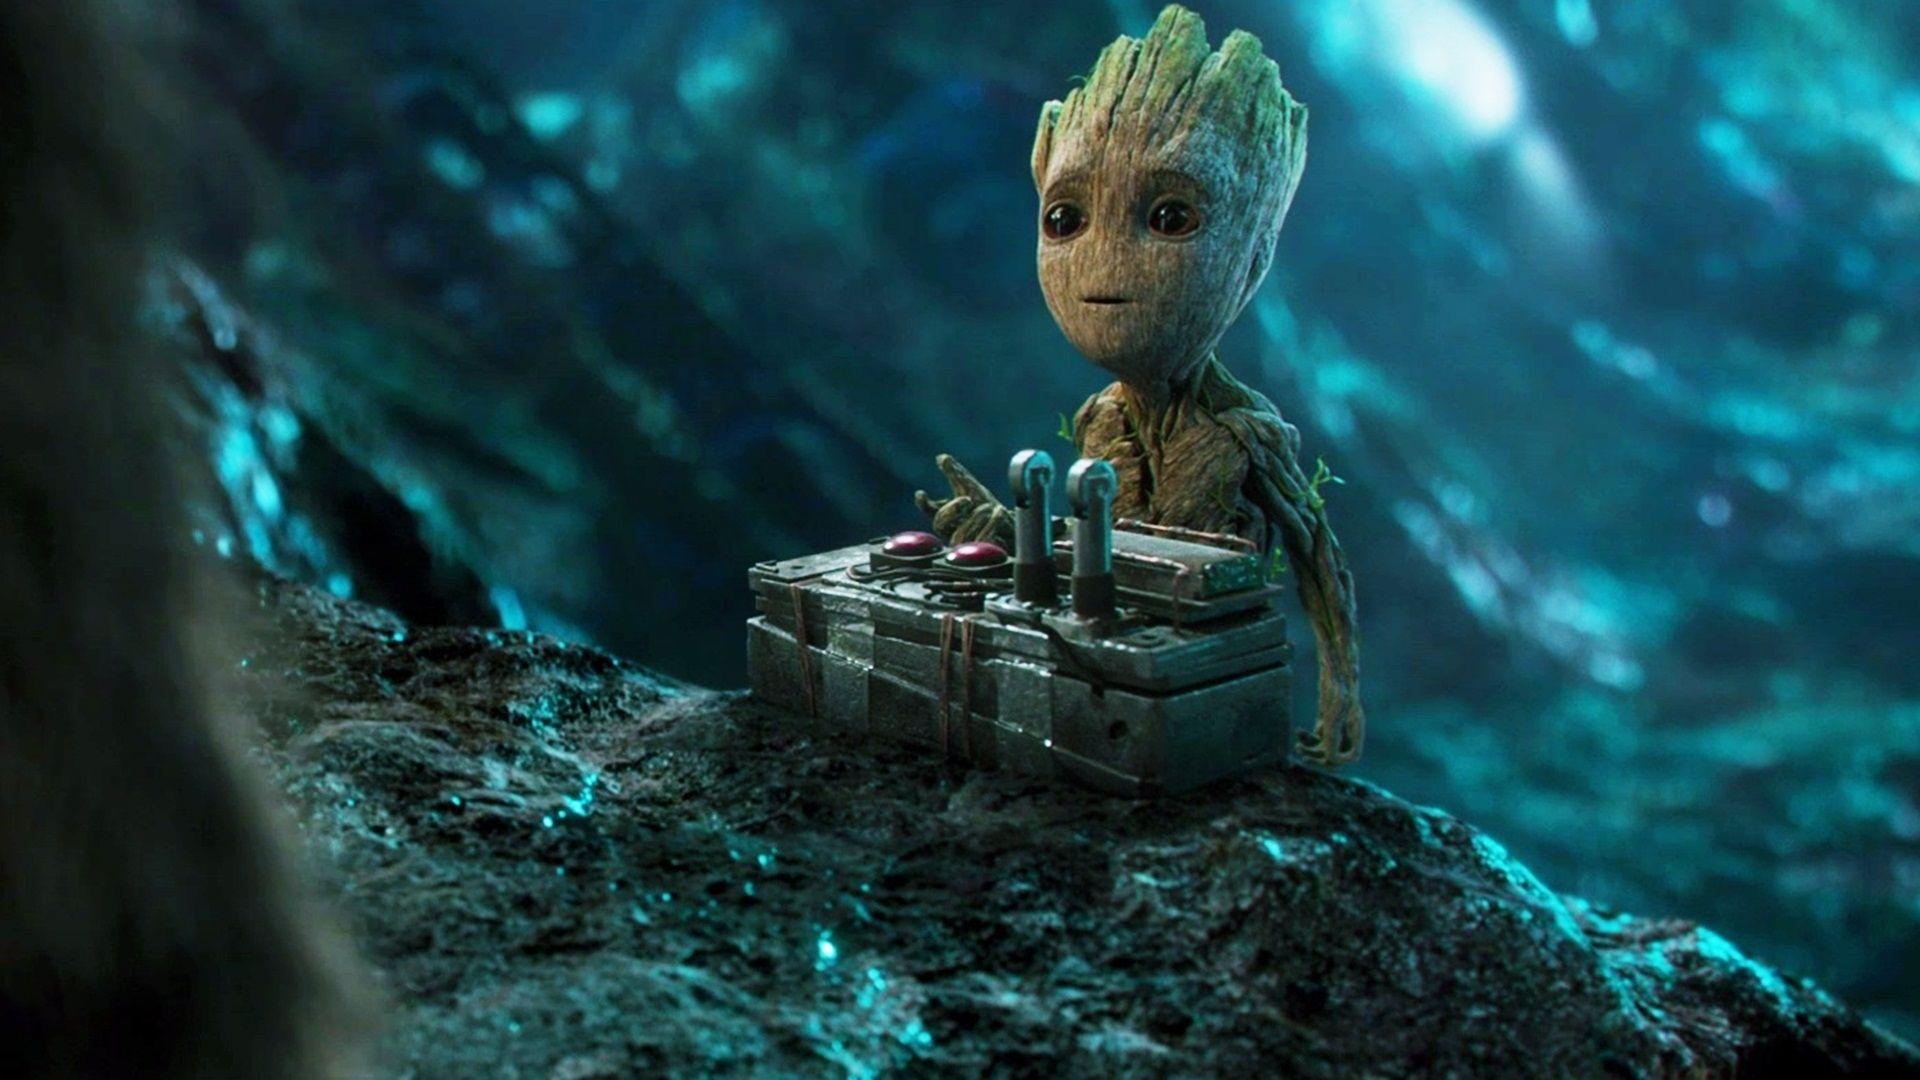 【Baby Groot Wallpaper】& Image Download HD Picture